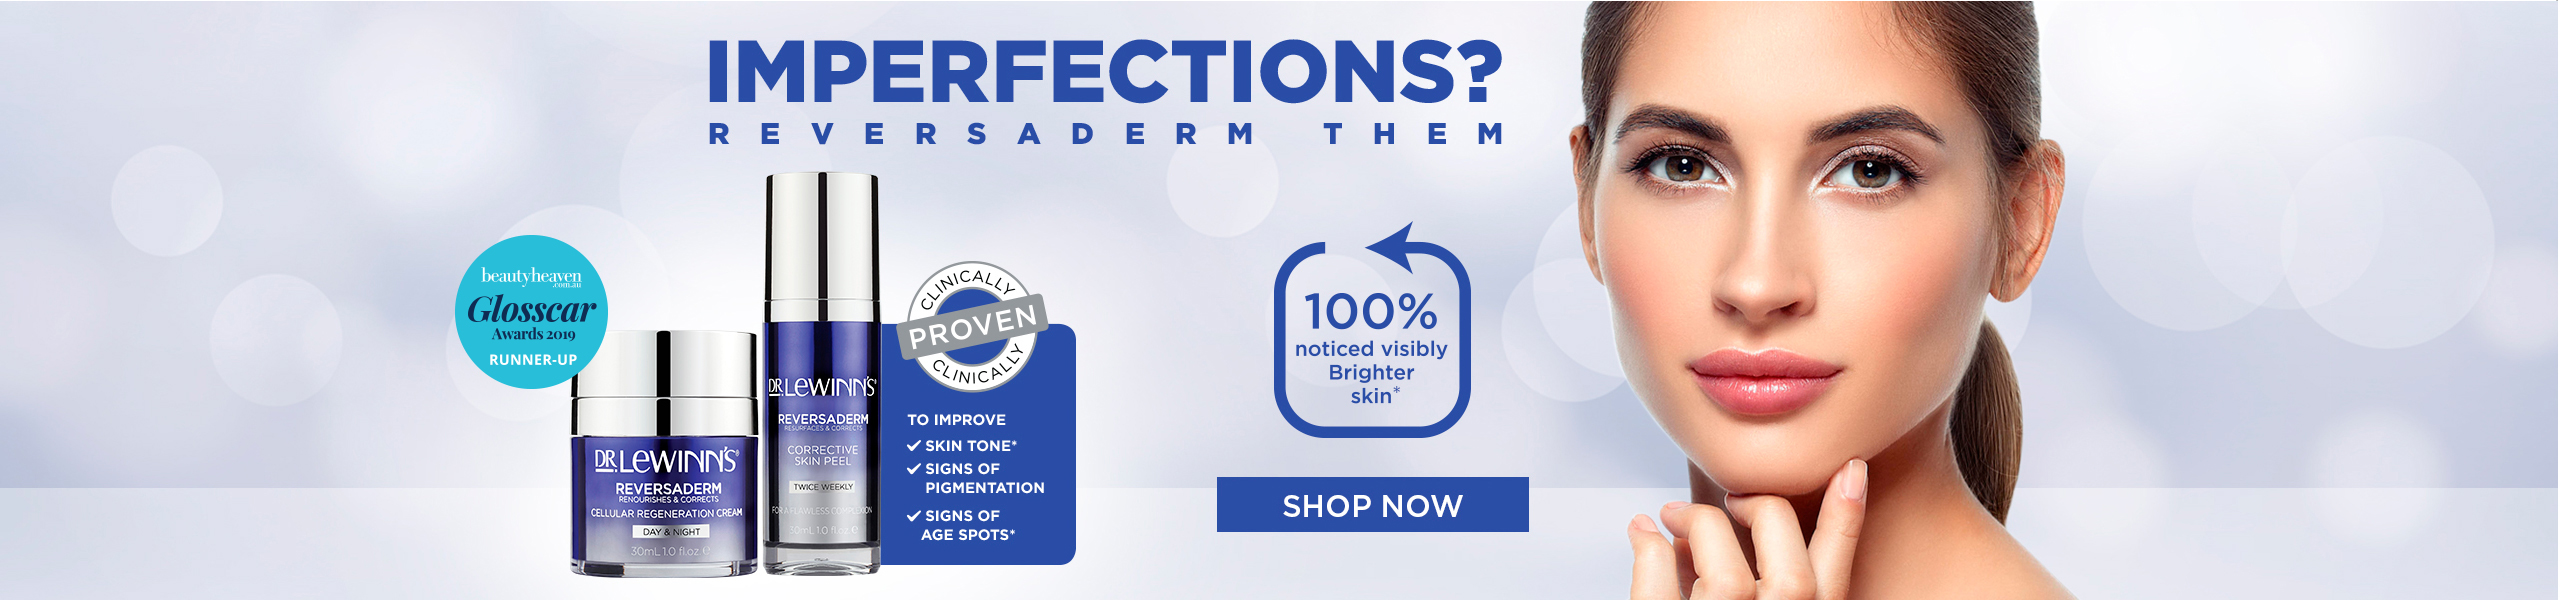 Imperfections? Reversaderm them! Clinically proven to improve skin tone, signs of pigmentation and signs of age spots.